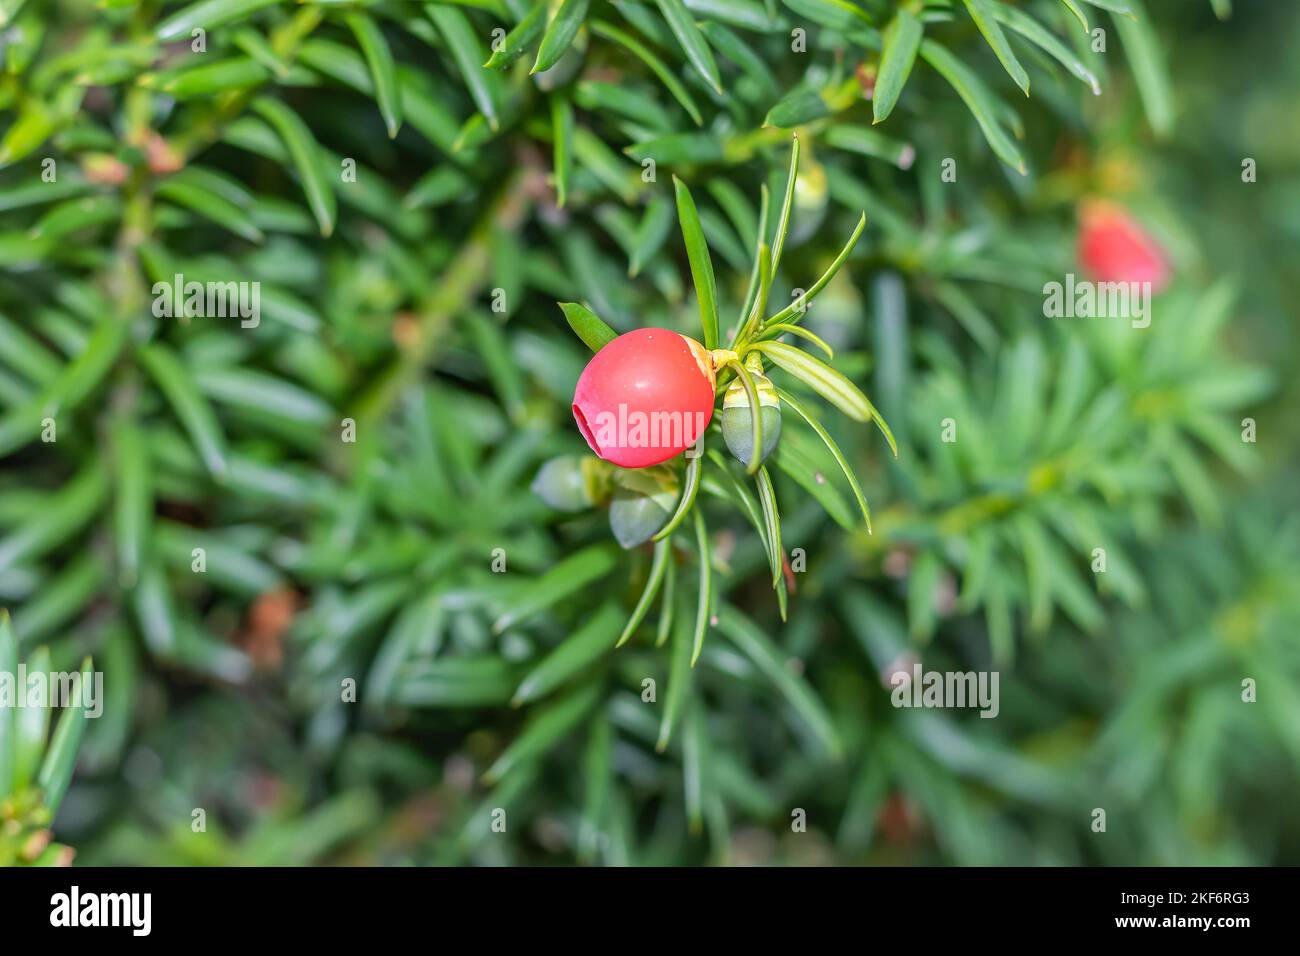 Taxus baccata, red and green cones of yew with green foliage Stock Photo